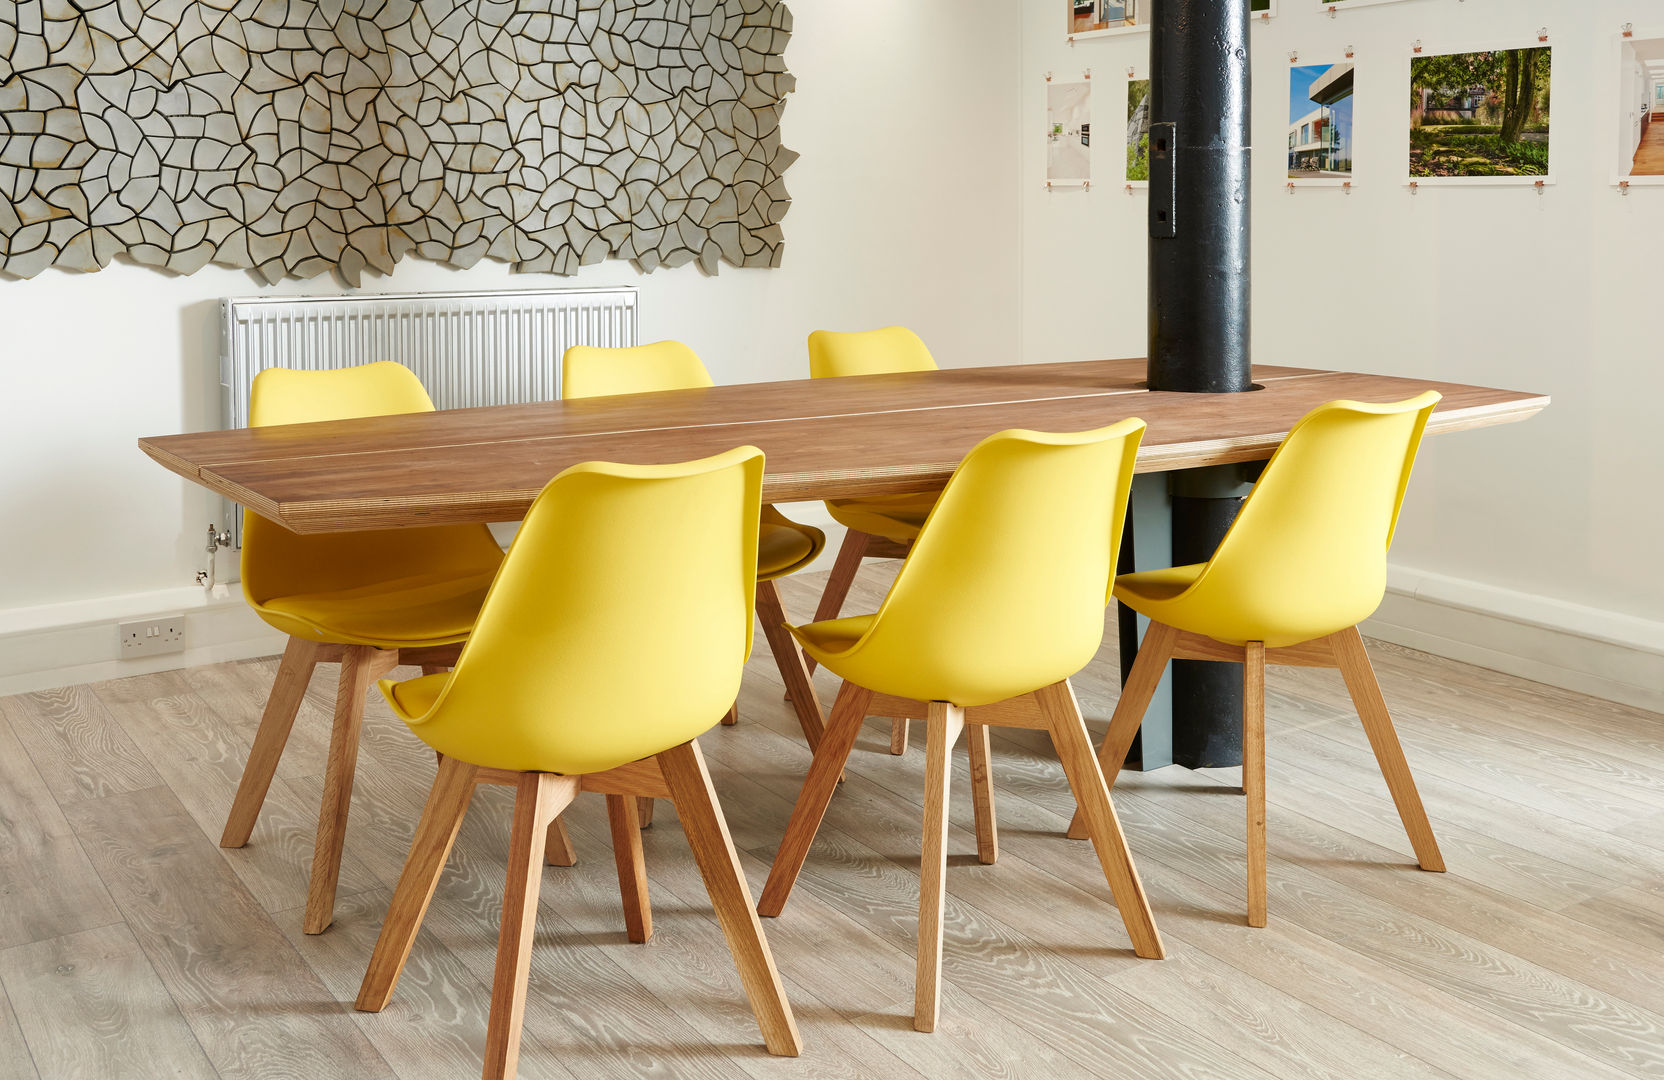 Hems Studio Specially Designed Meeting Table Barc Architects Commercial spaces Wood Wood effect meeting table,conference table,yellow chairs,cantilever,contemporary,modern,meeting room,wooden table,Office spaces & stores